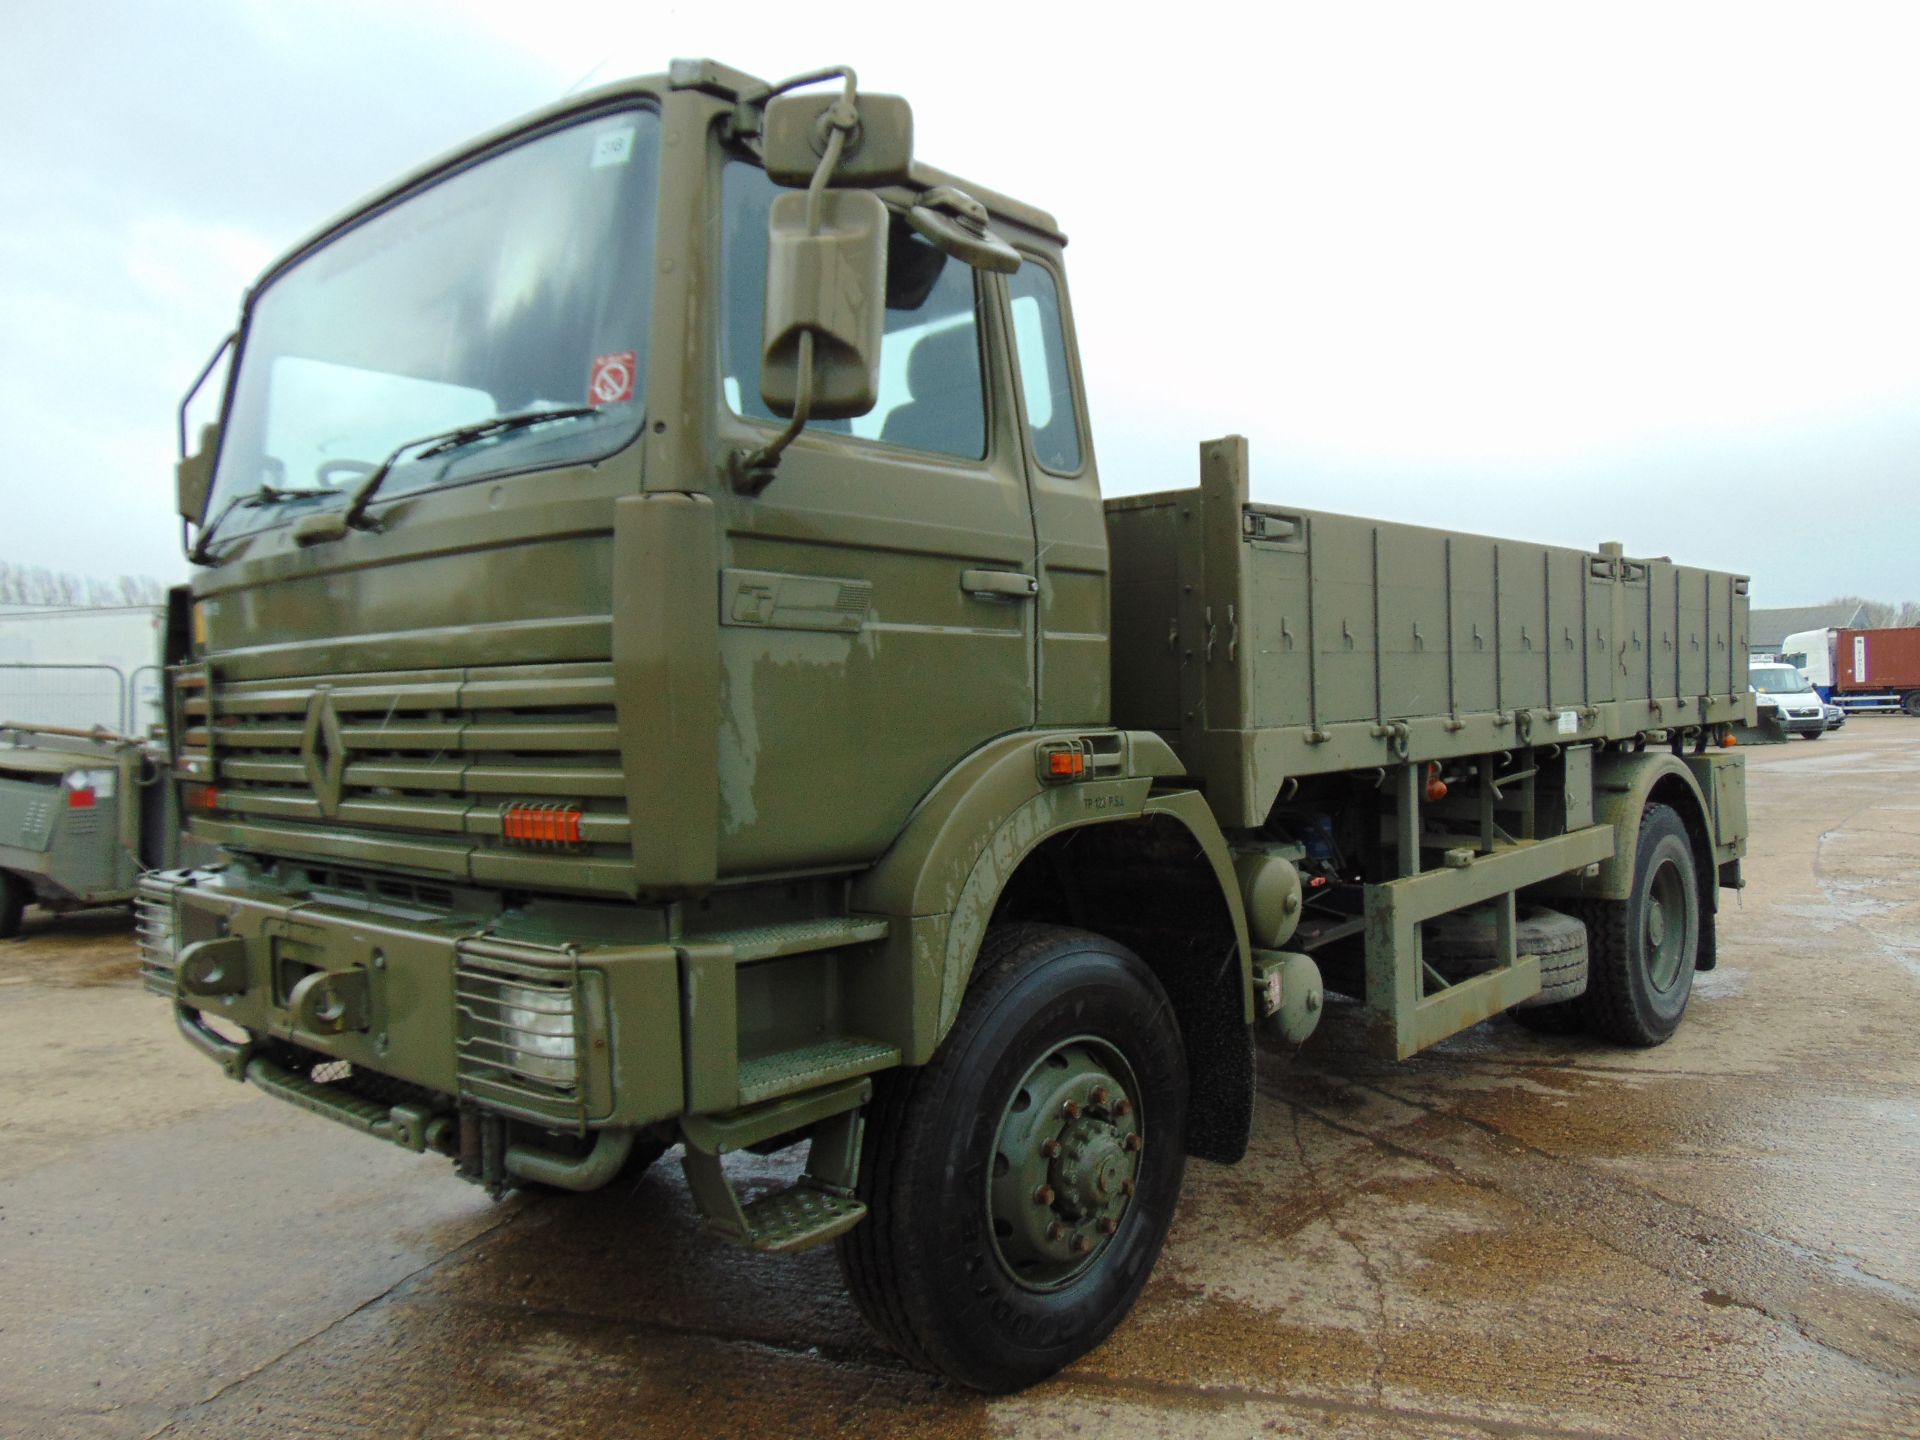 Renault G300 Maxter RHD 4x4 8T Cargo Truck with fitted winch - Image 3 of 15